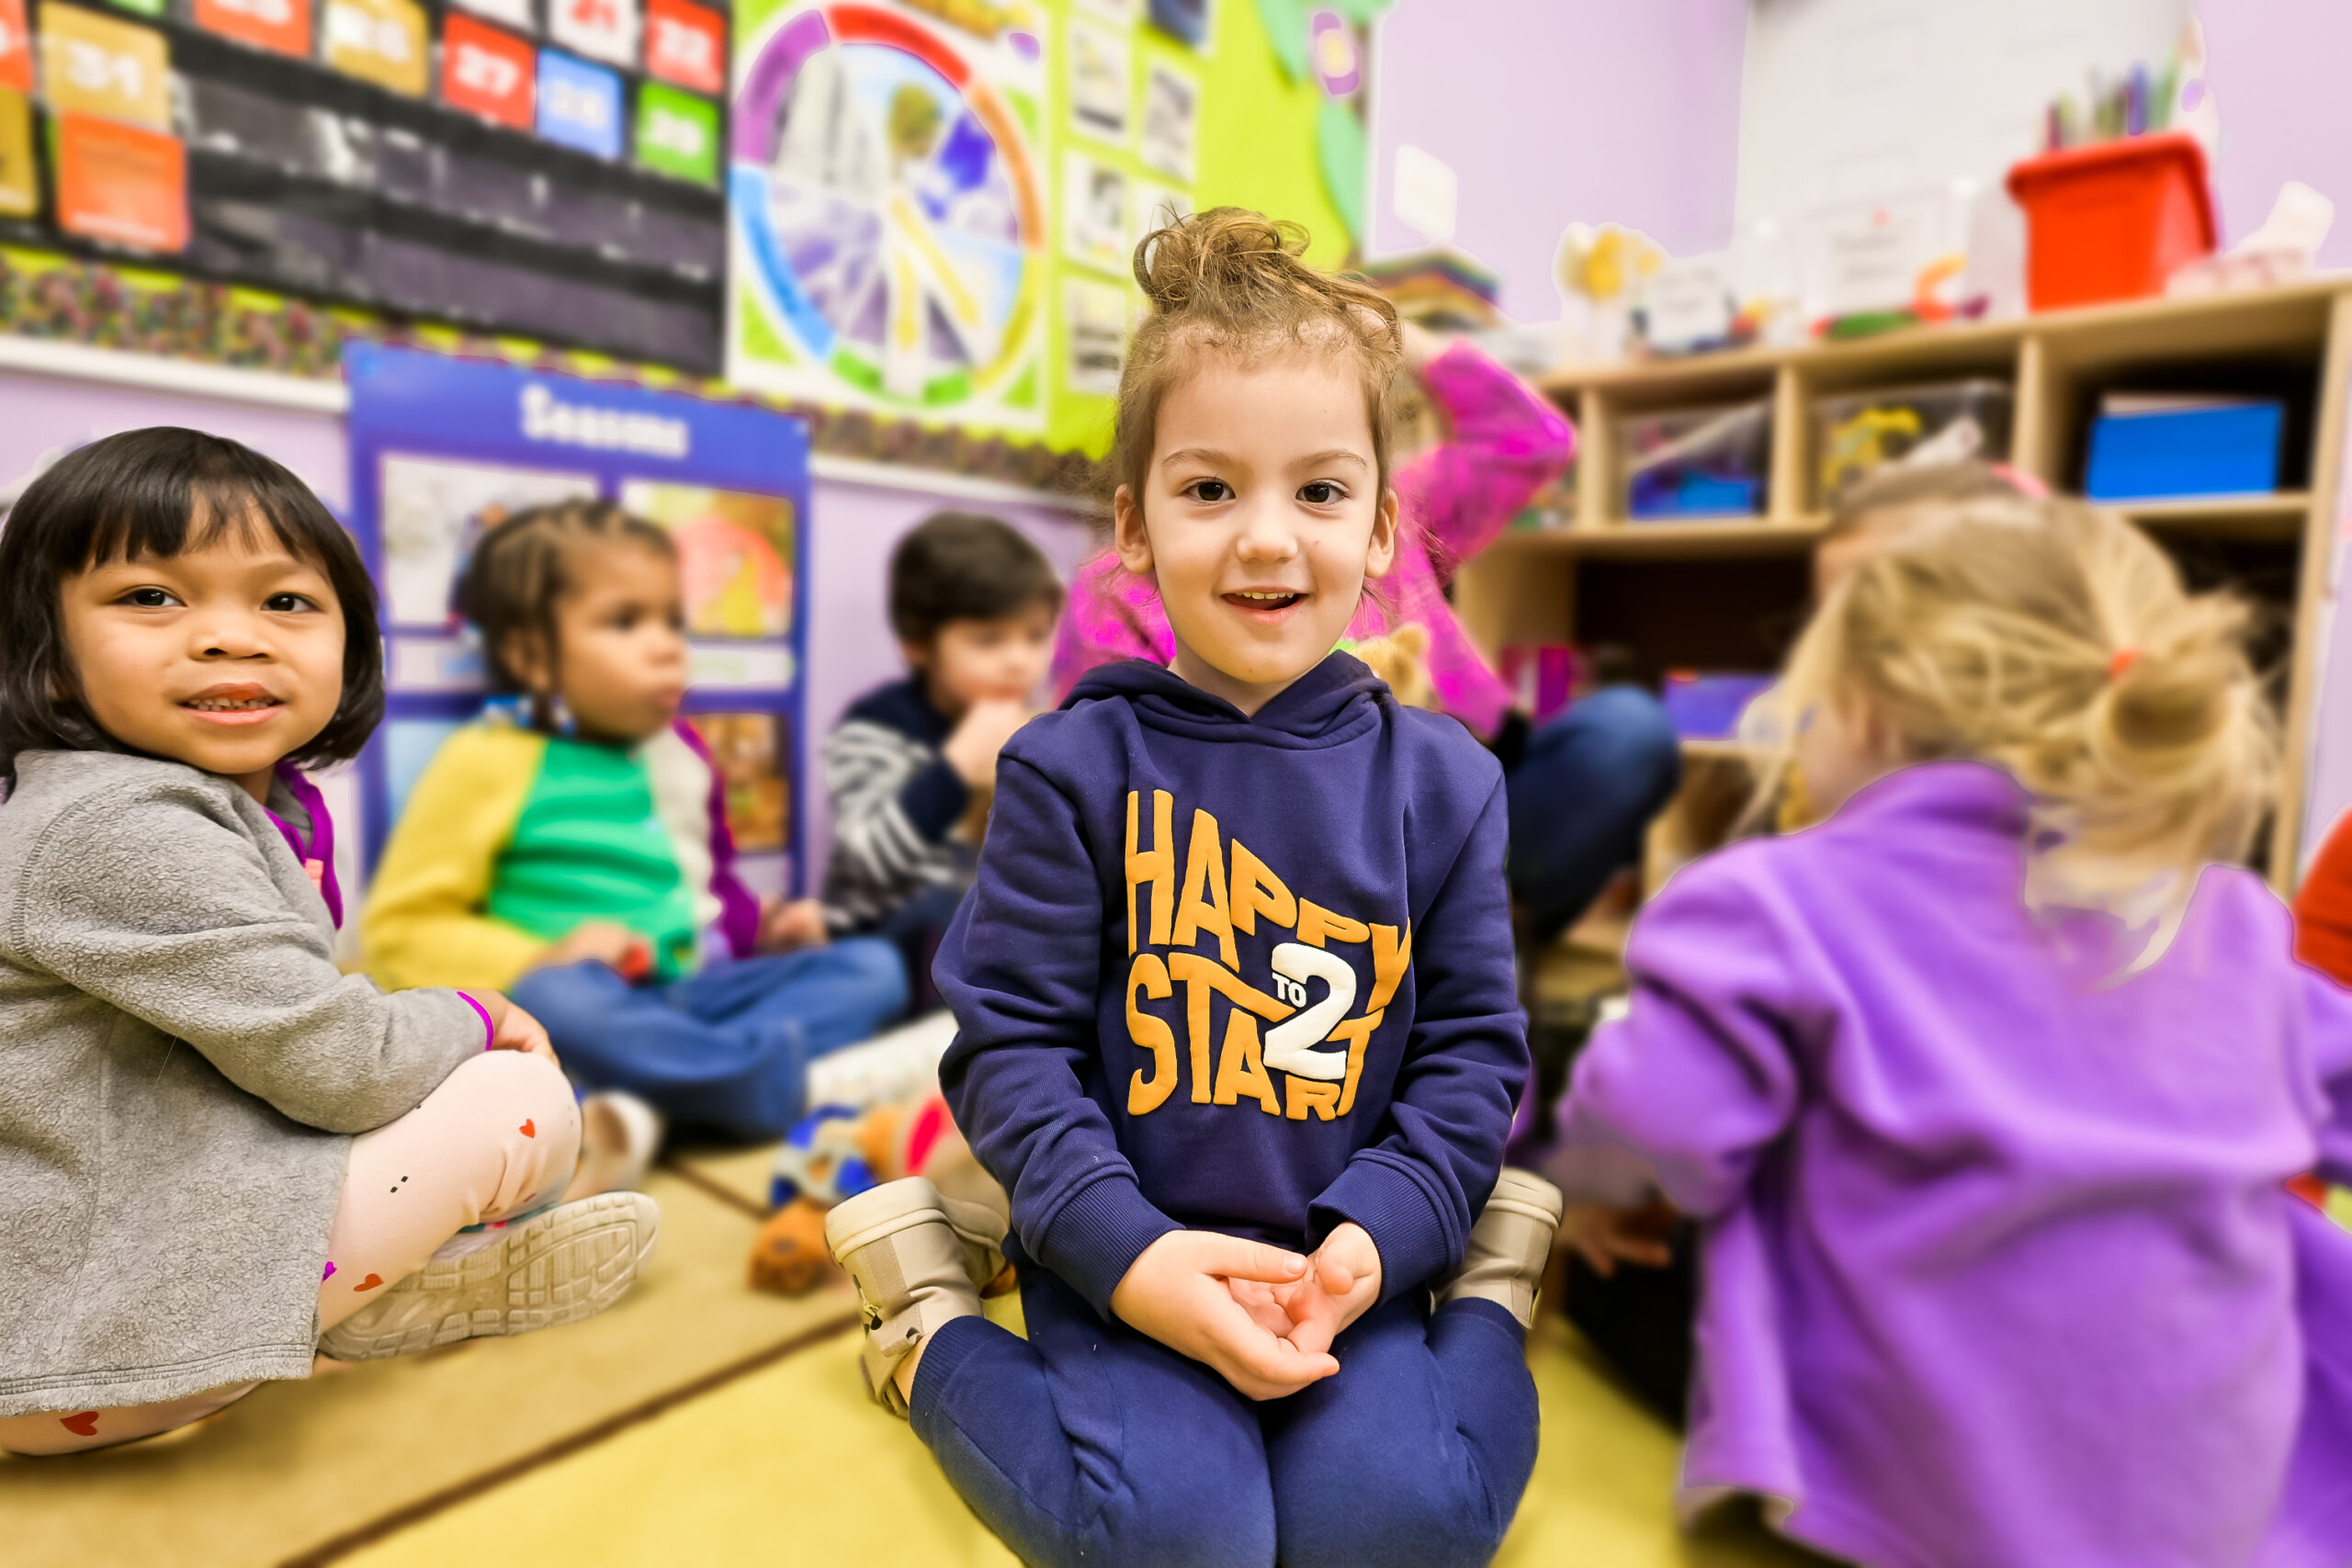 Group of children sitting on the floor in a classroom, with one child in the foreground wearing a navy blue hoodie that says 'Happy to Start,' smiling and looking at the camera